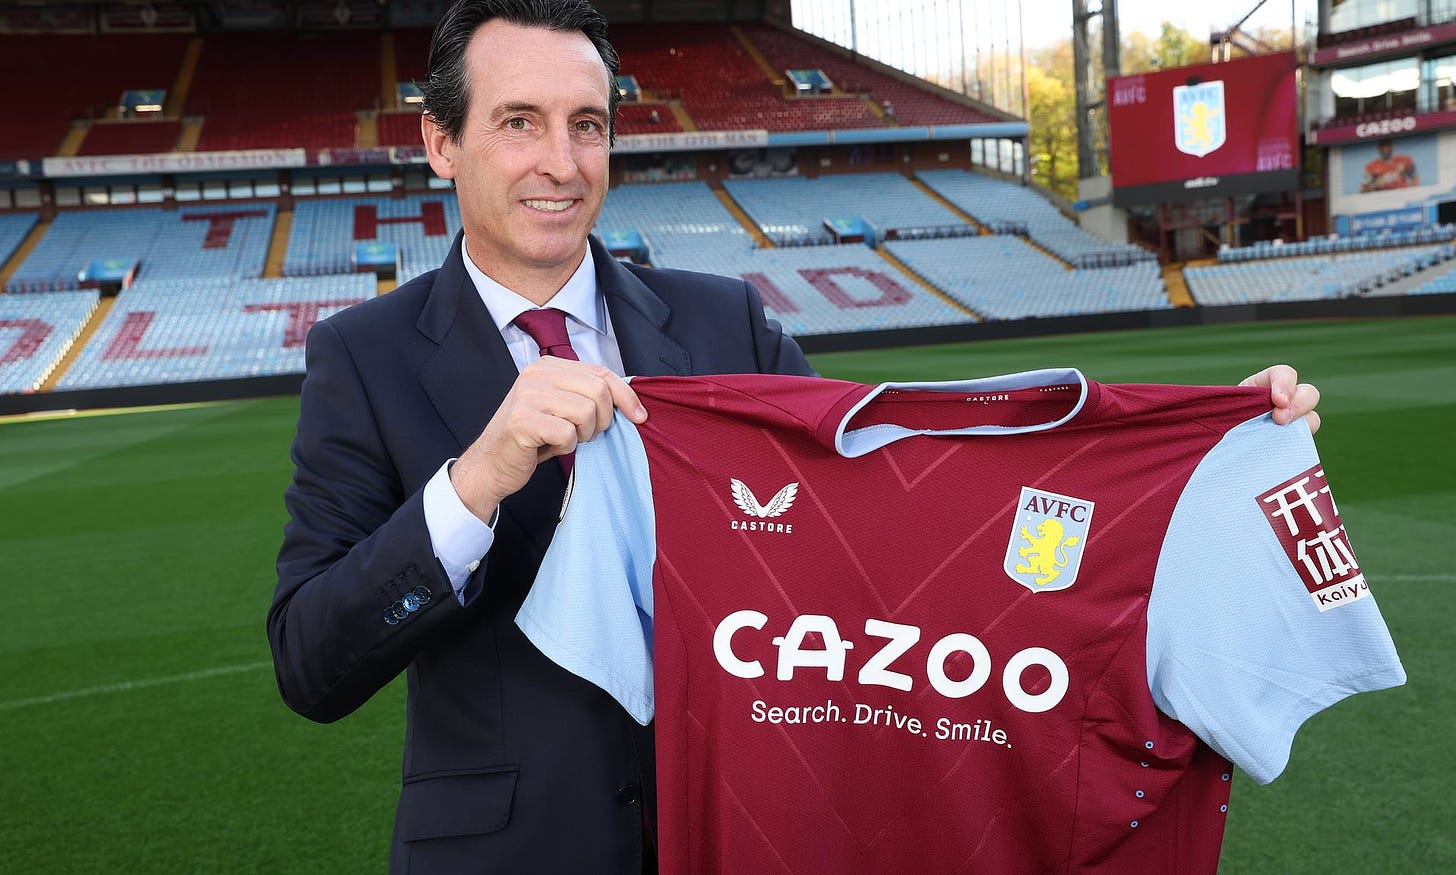 Unai Emery WILL be backed in the January transfer window by Aston Villa |  Daily Mail Online